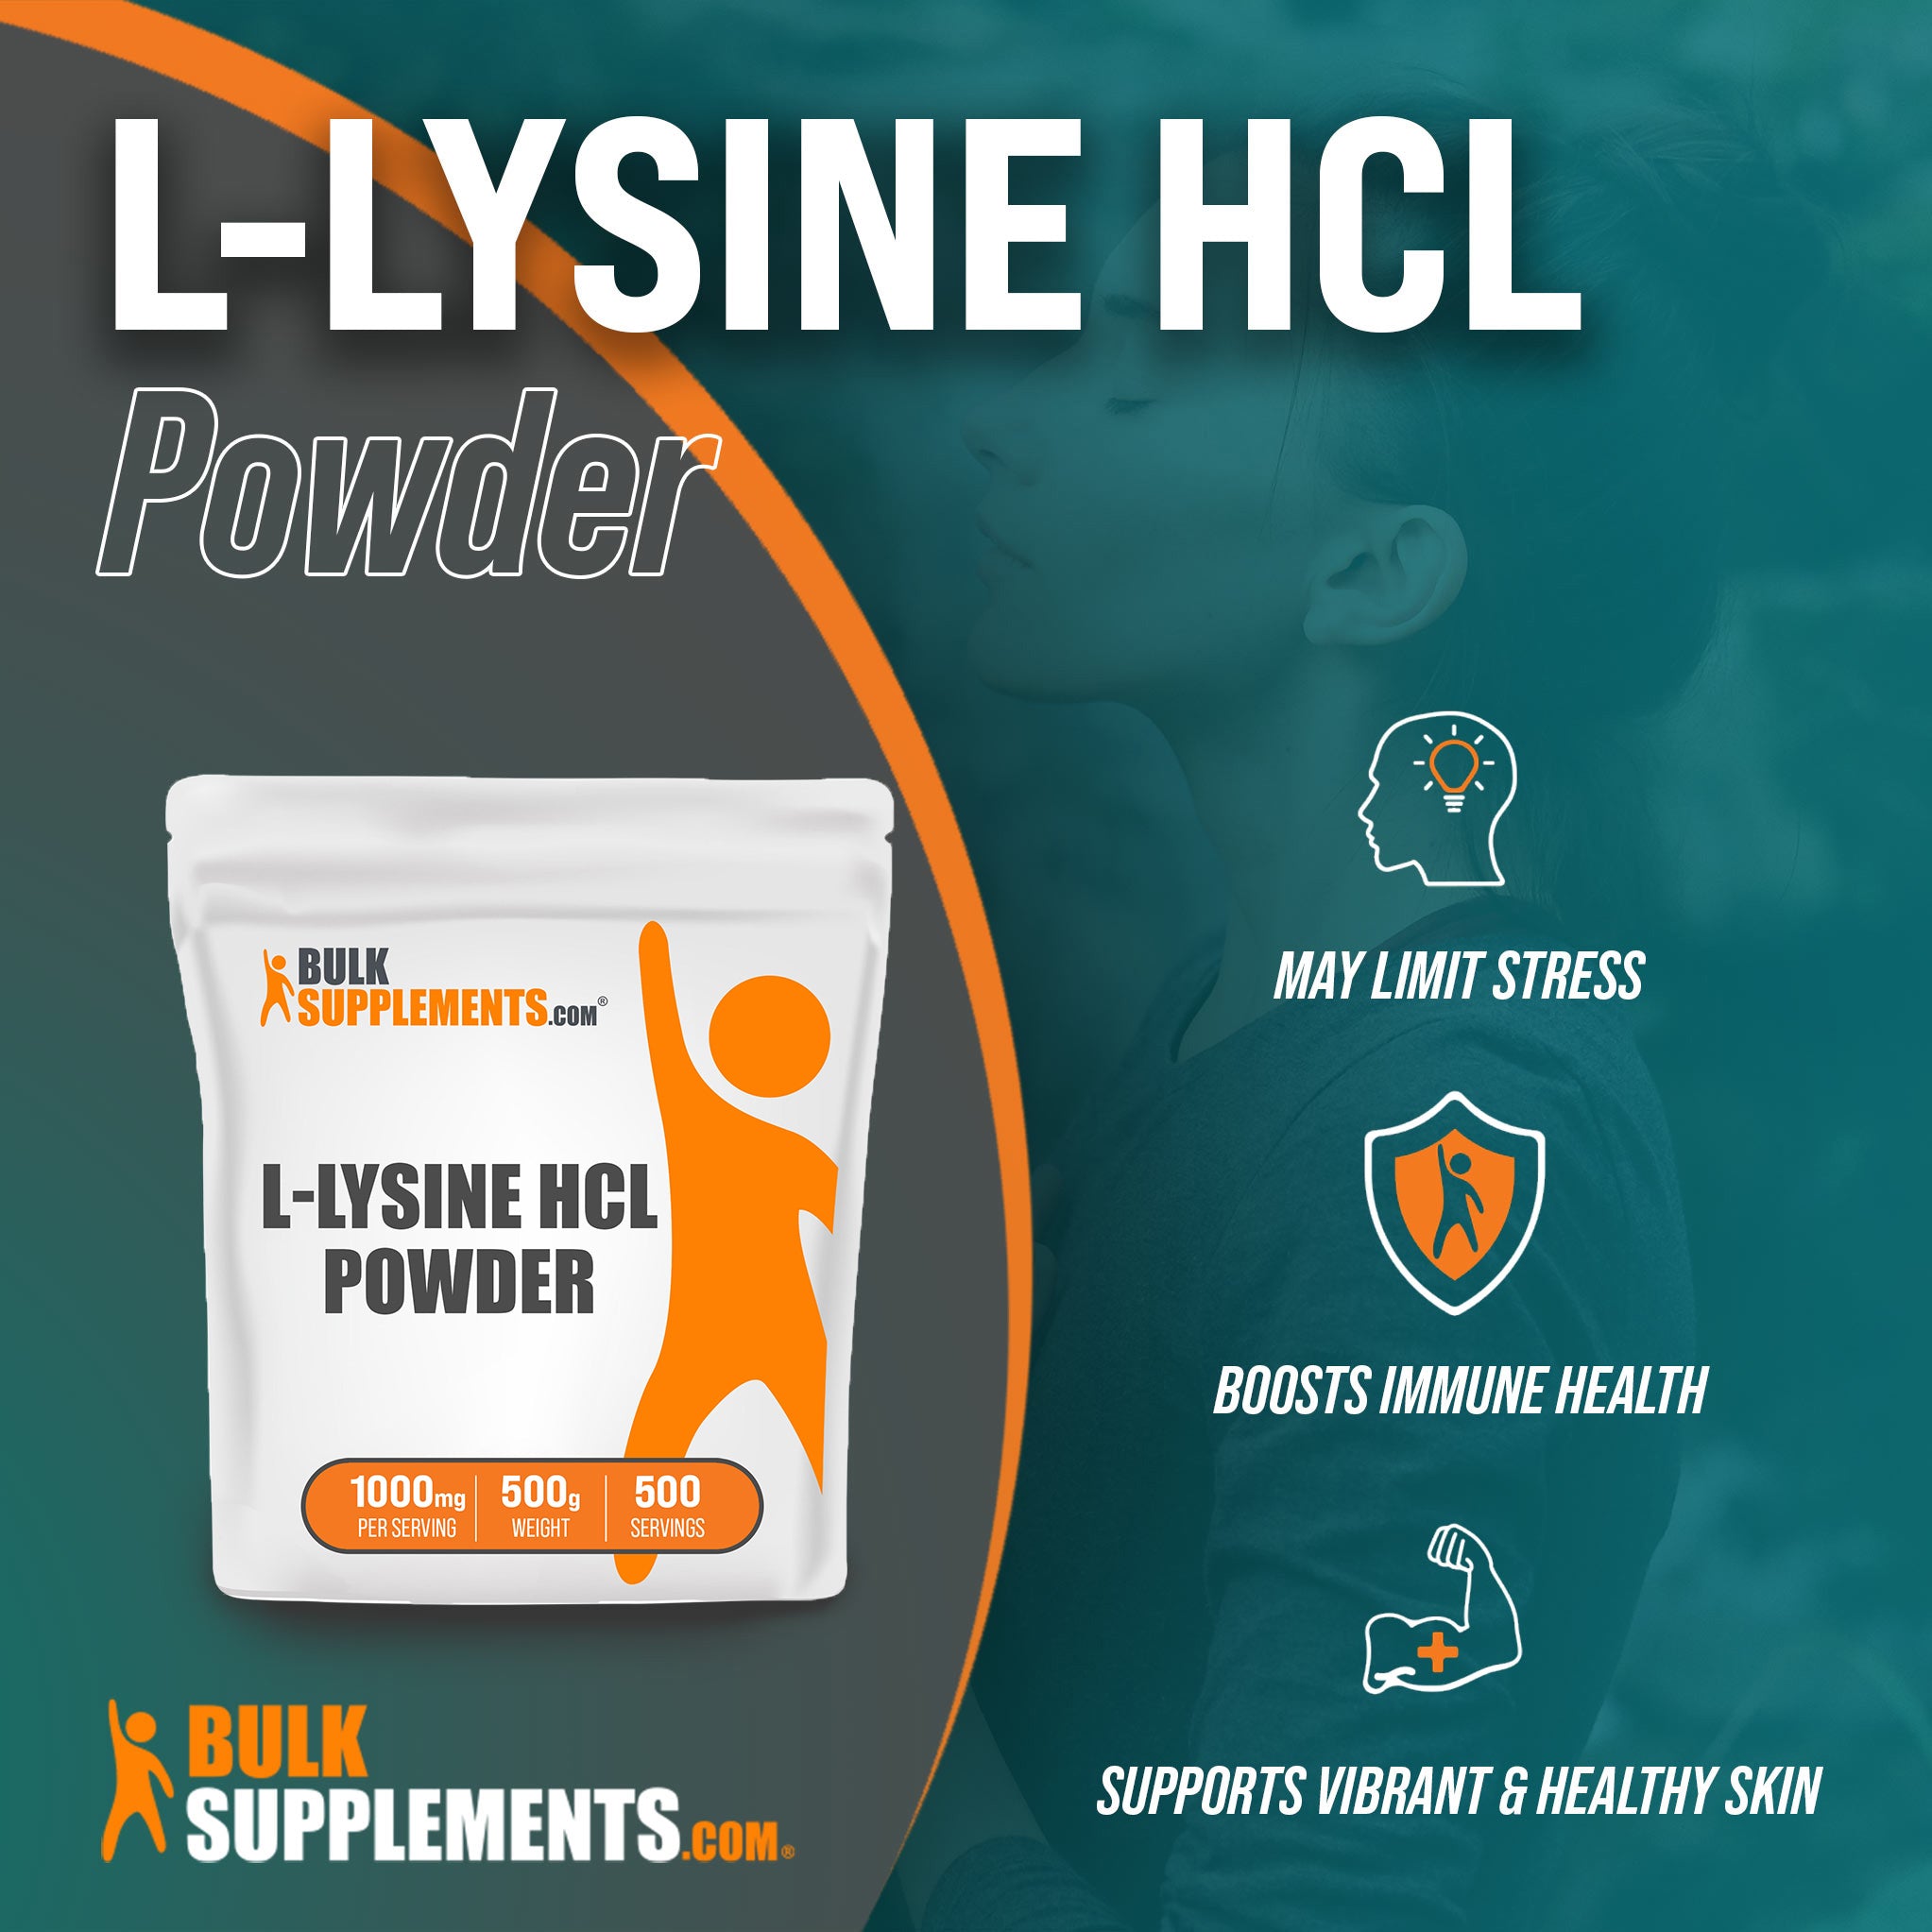 Benefits of L-Lysine HCl: may limit stress, boosts immune health, supports vibrant and healthy skin